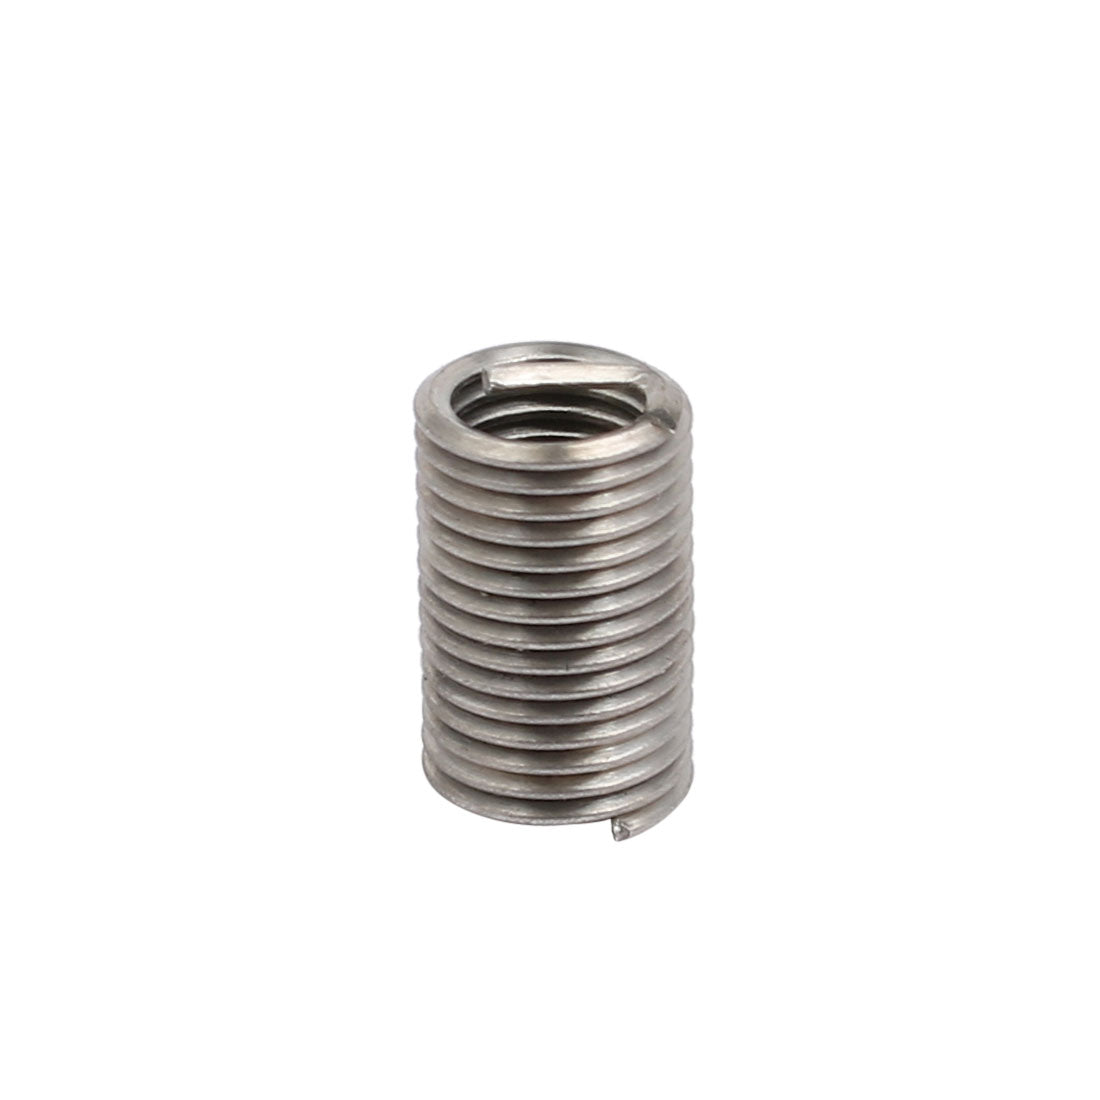 uxcell Uxcell M5x0.8mmx15mm 304 Stainless Steel Helical Coil Wire Thread Insert 25pcs